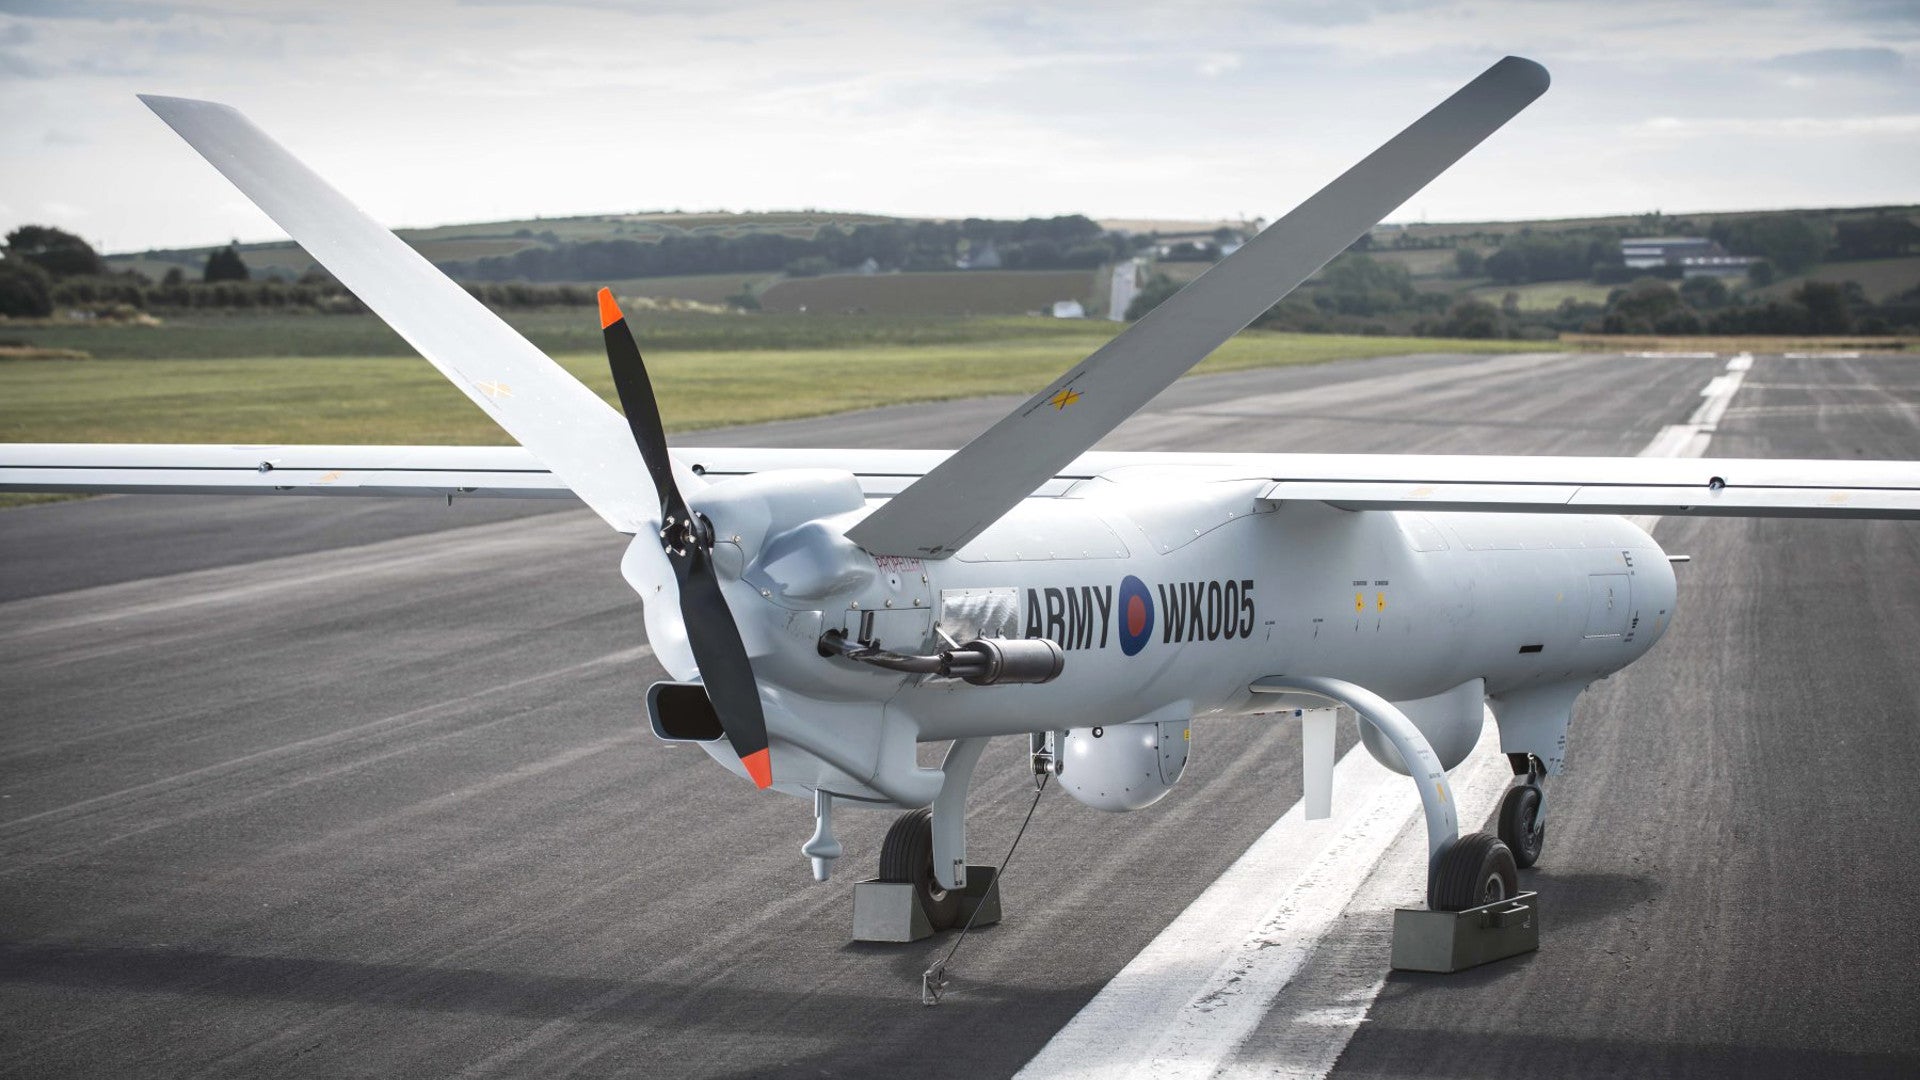 The UK Has Spent Nearly 15 Years Developing Watchkeeper Drones It Says Aren’t Safe to Fly